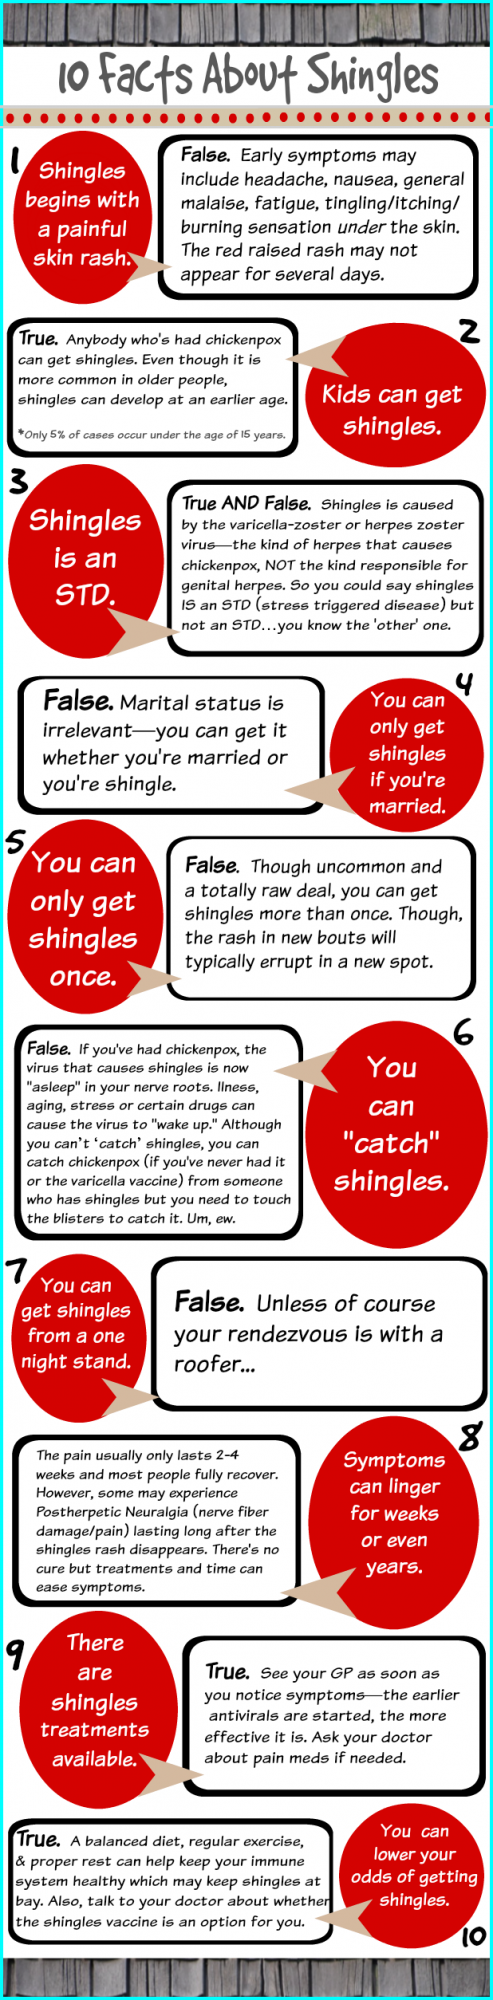 Shingles symptoms and treatments facts